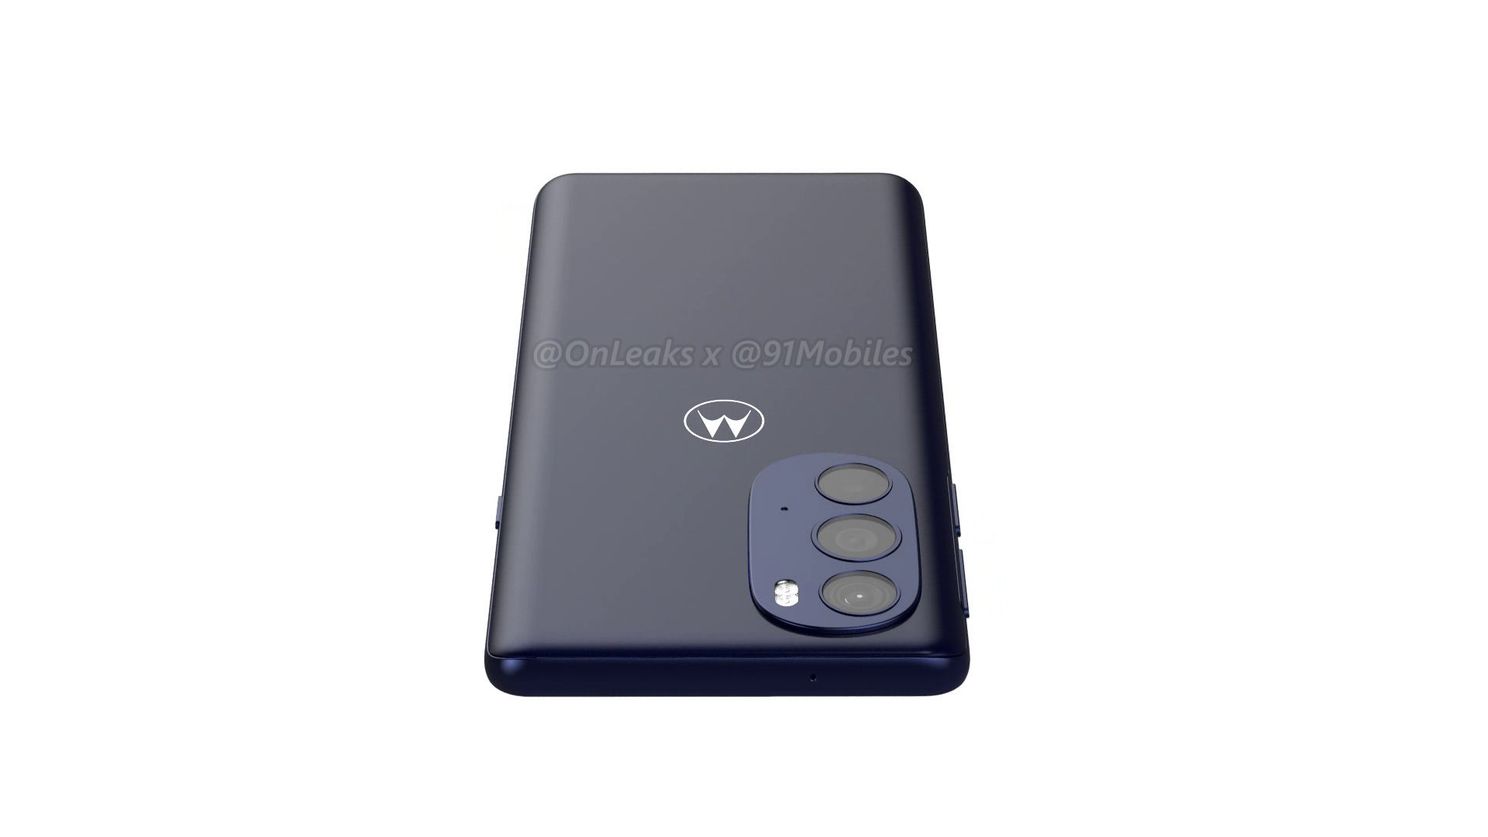 Motorola Edge 30 Ultra: first images of design surfaced